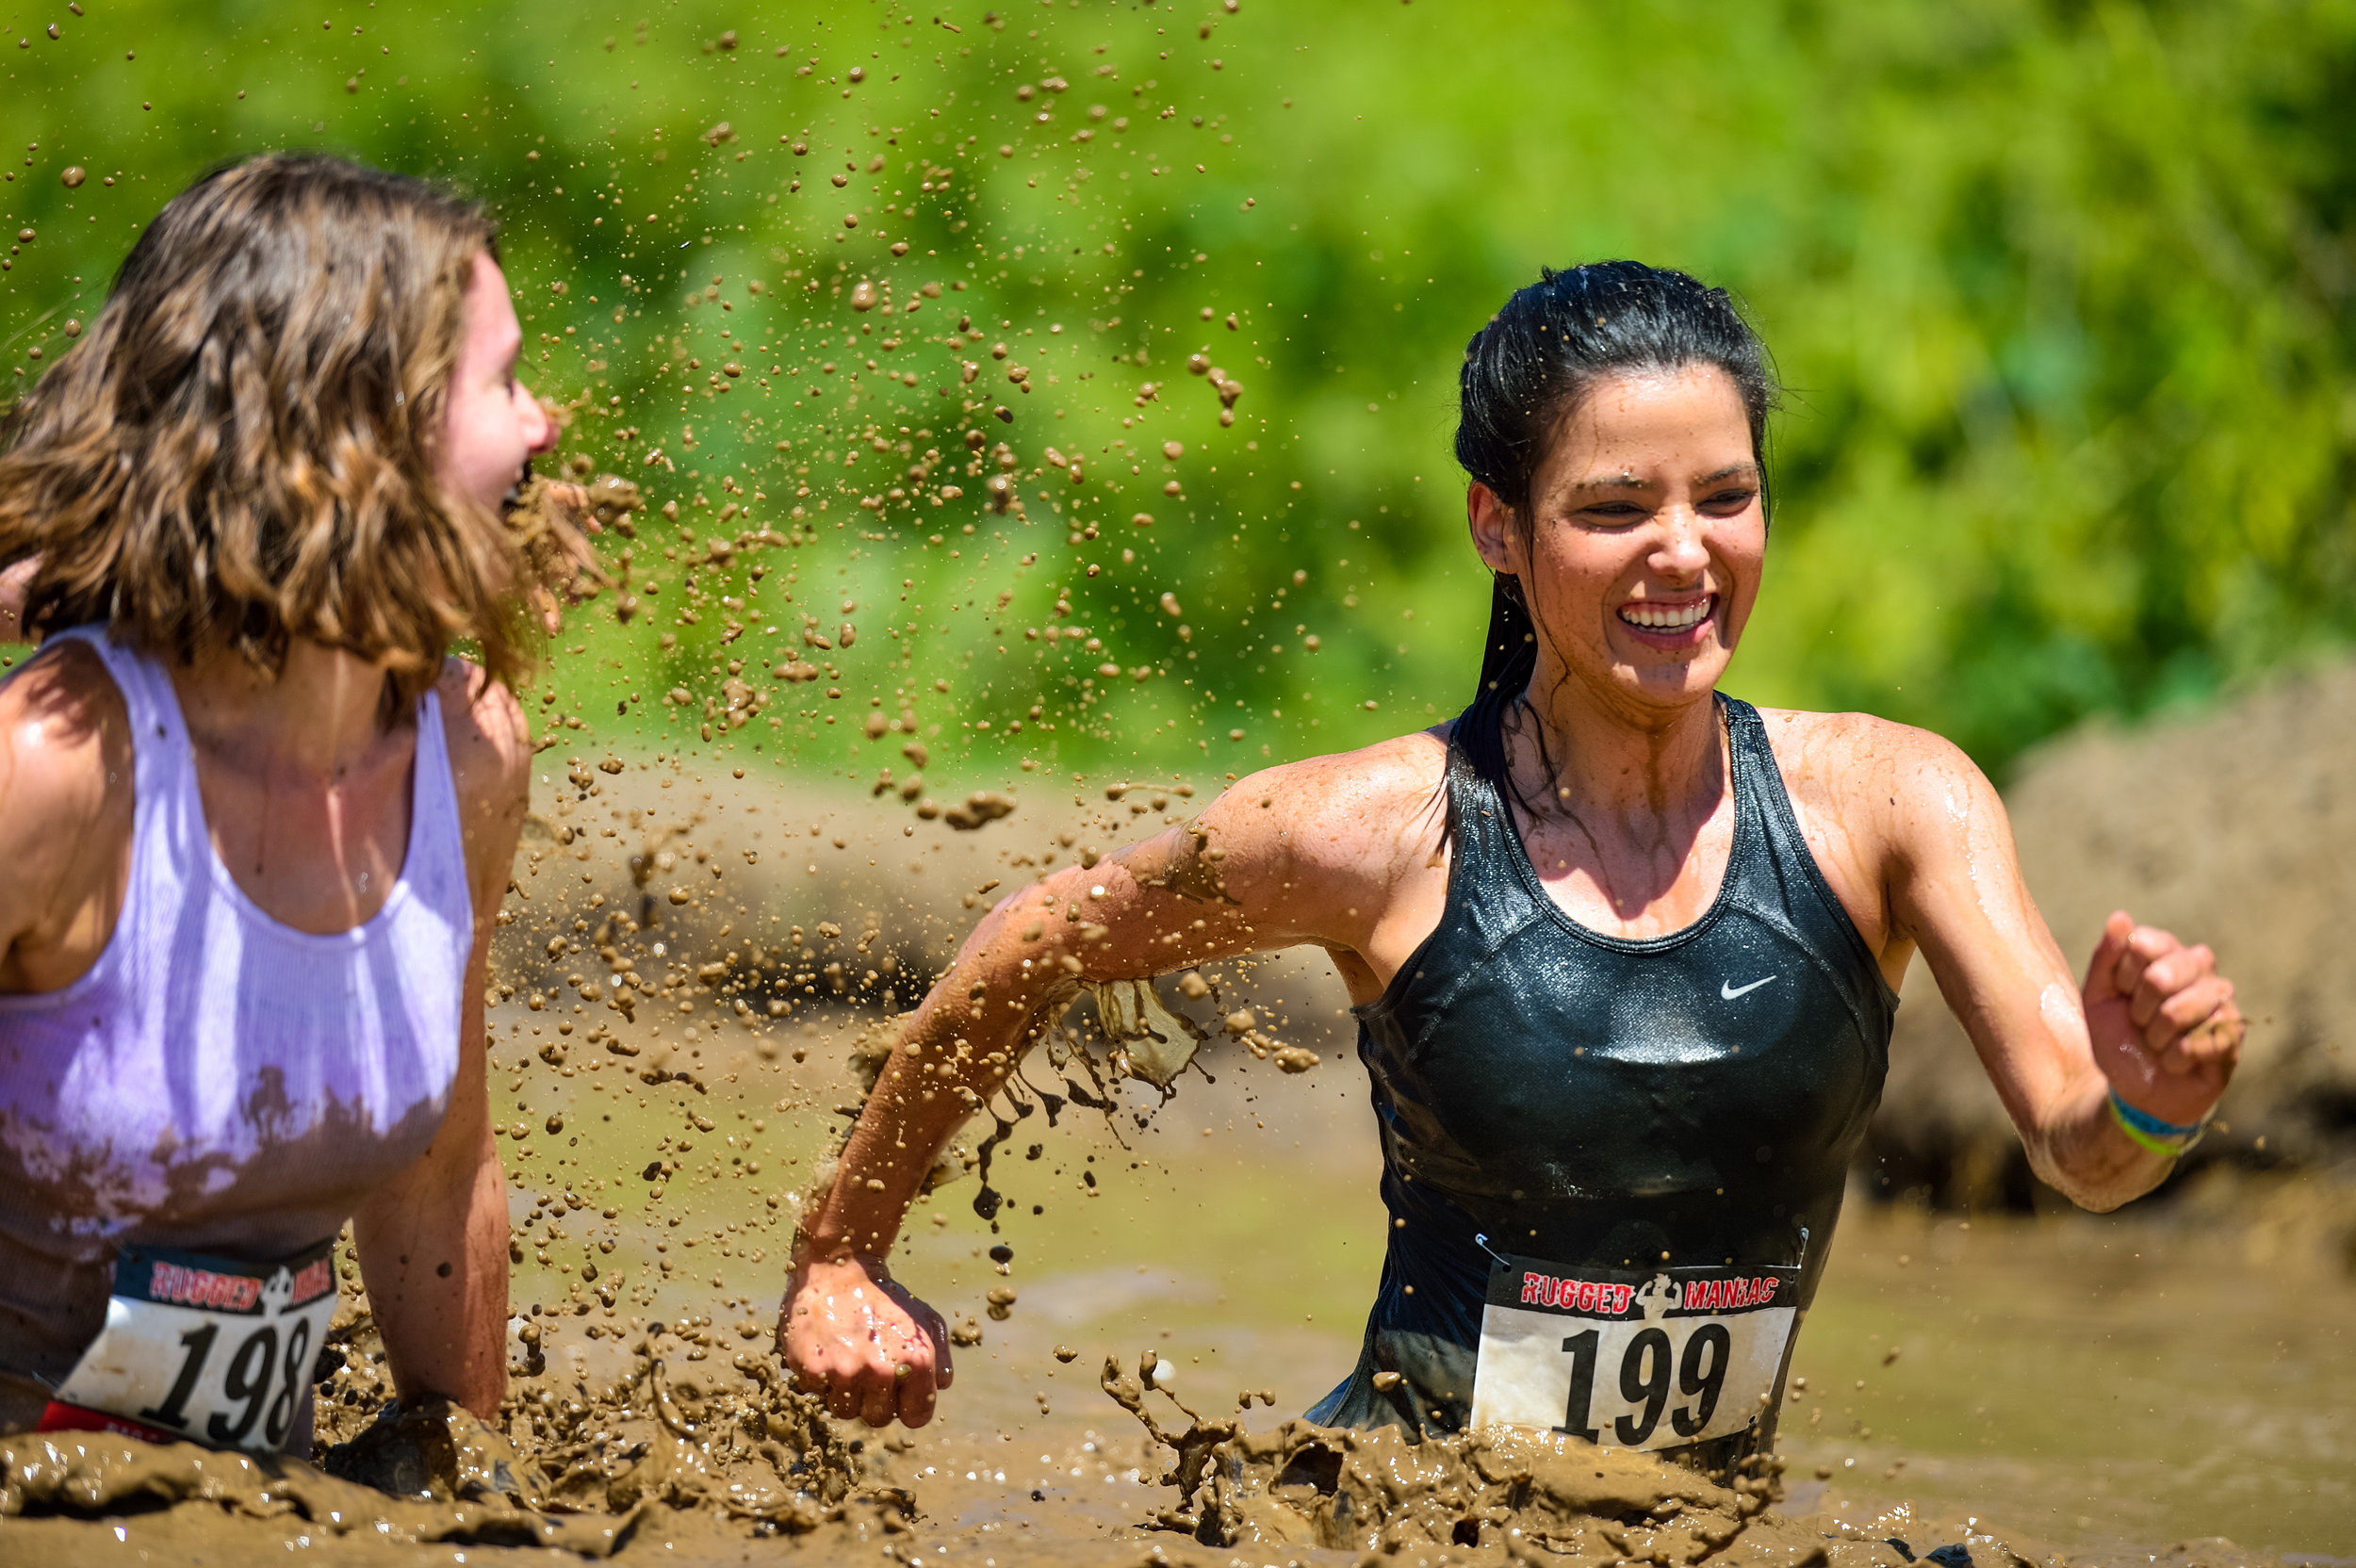 Something Your Should Know Rugged Maniac Athleisure Mag Culture